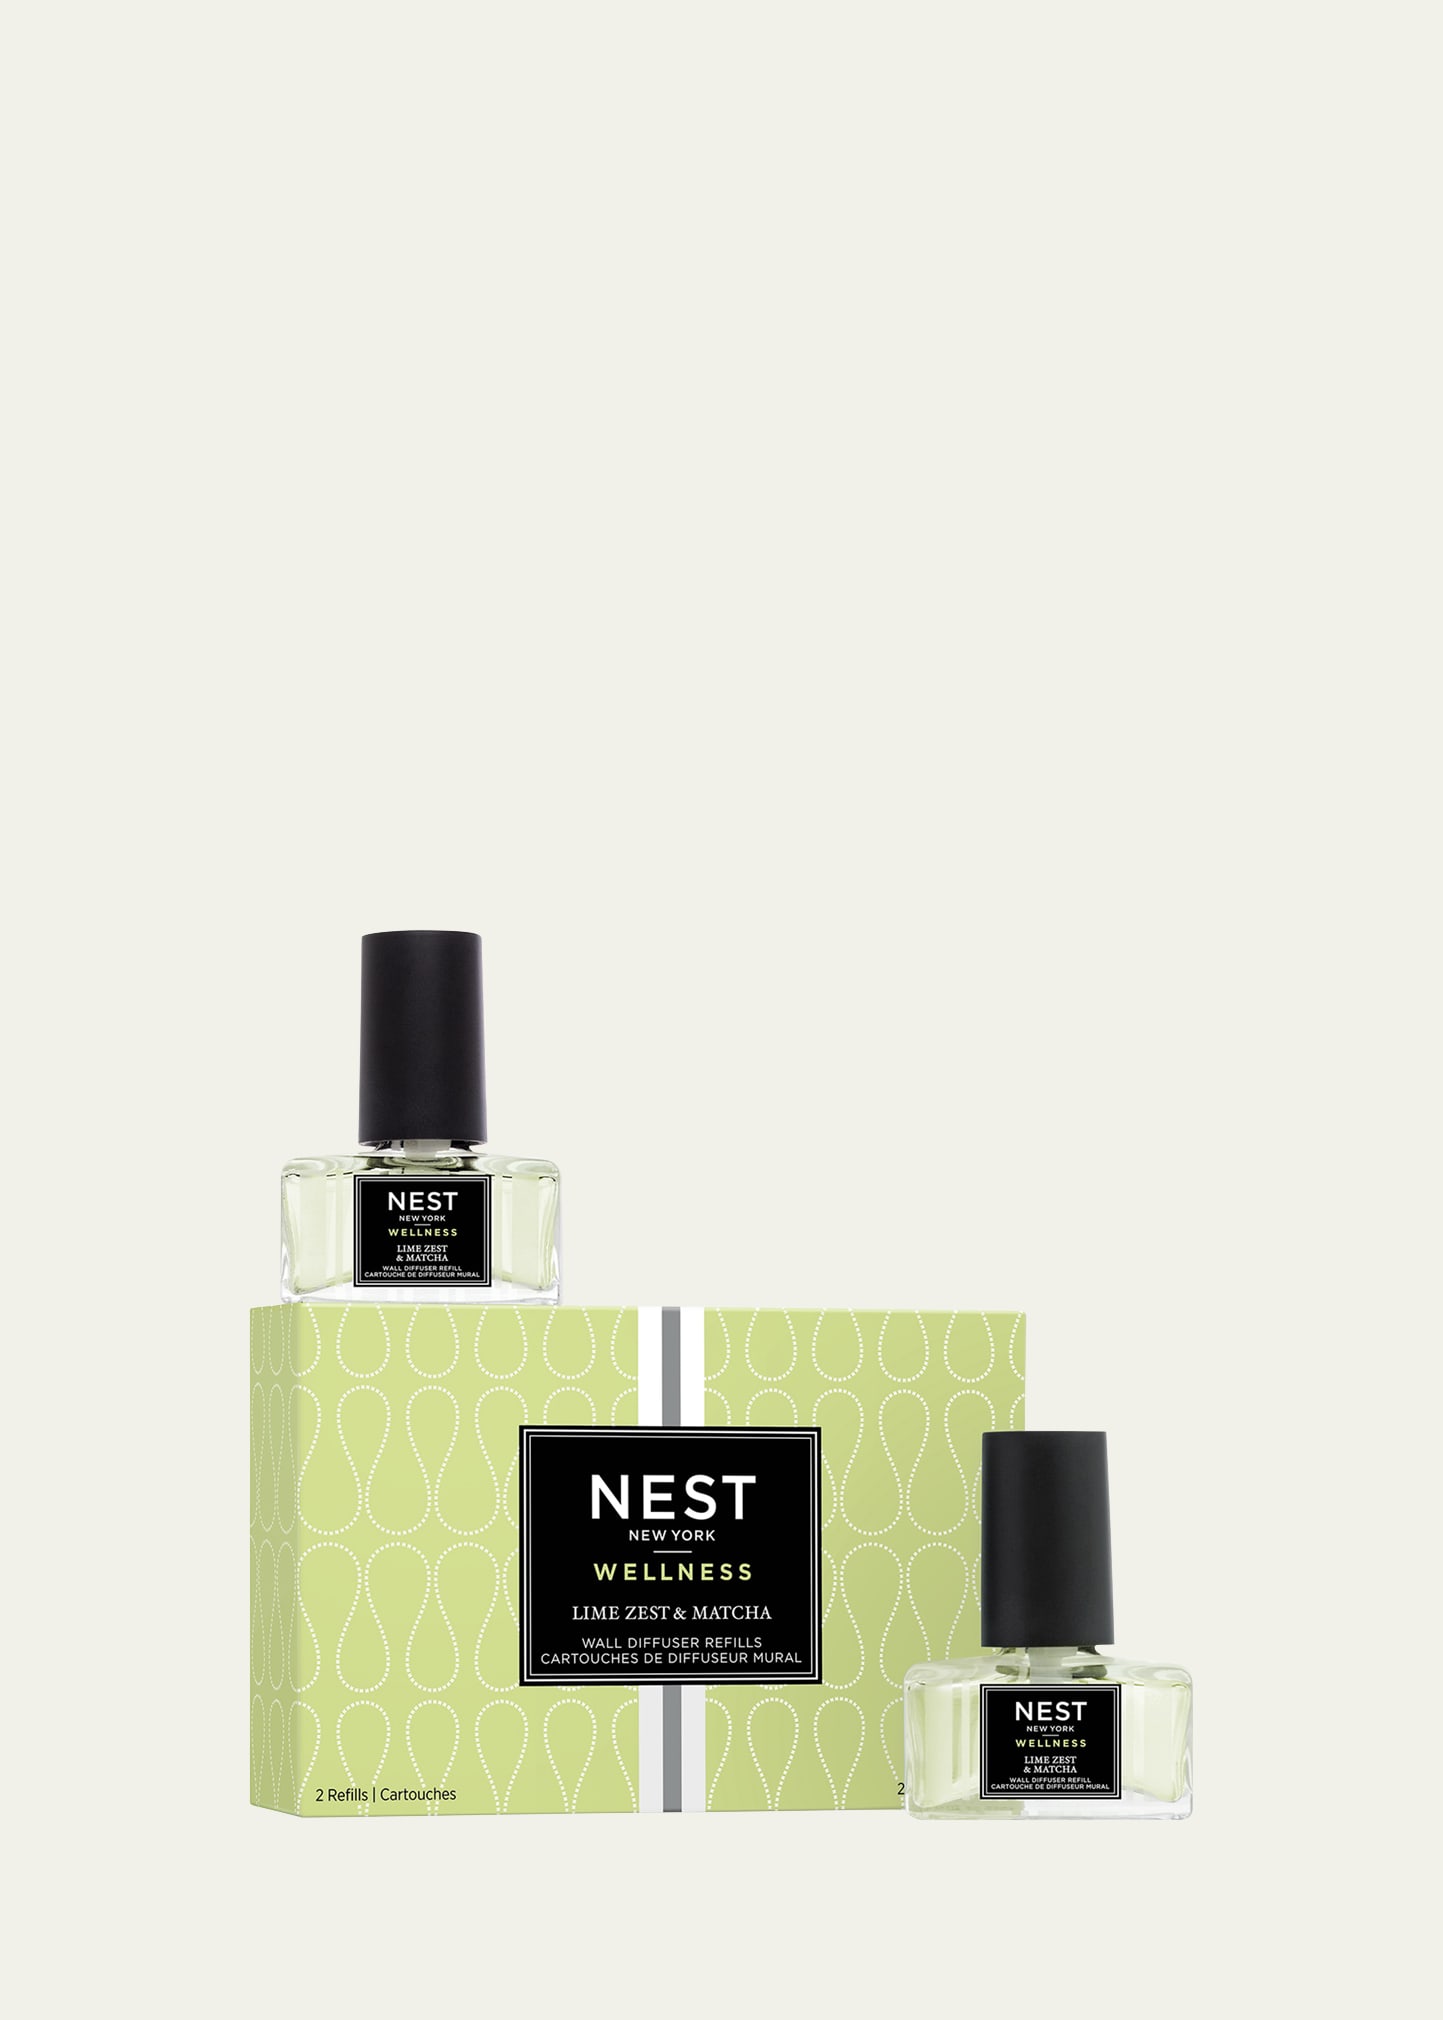 Nest New York Lime Zest And Matcha Wall Diffuser Refill In White